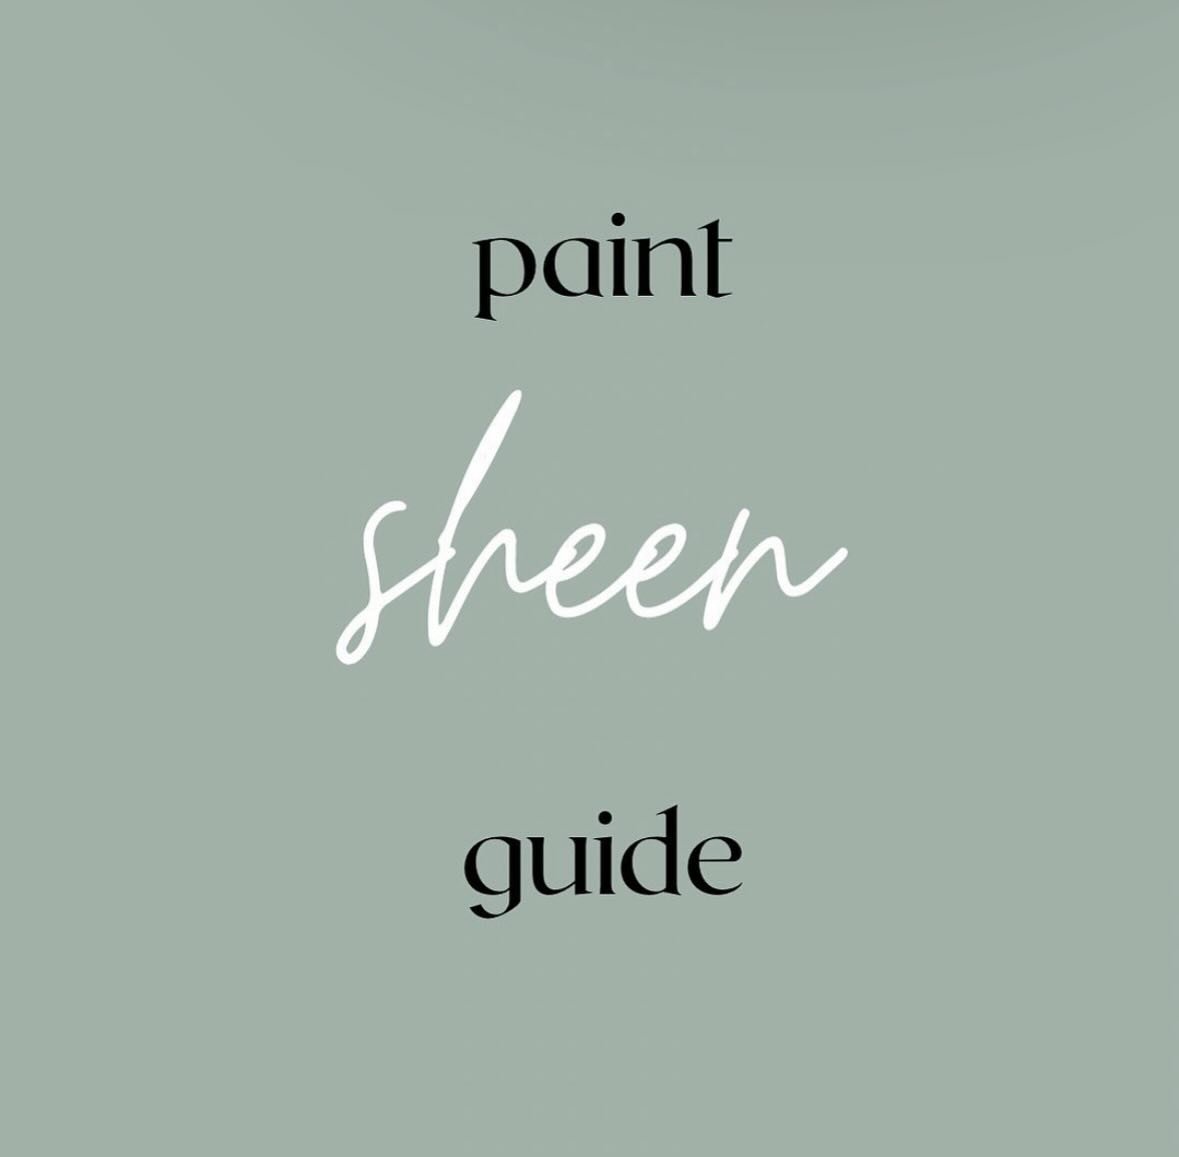 Choosing the right paint sheen
 
FLAT OR MATTE
A friend to walls that have something to hide, flat/matte soaks up, rather than reflects, light. It has the most pigment and will provide the most coverage, which translates to time and money savings. Ho